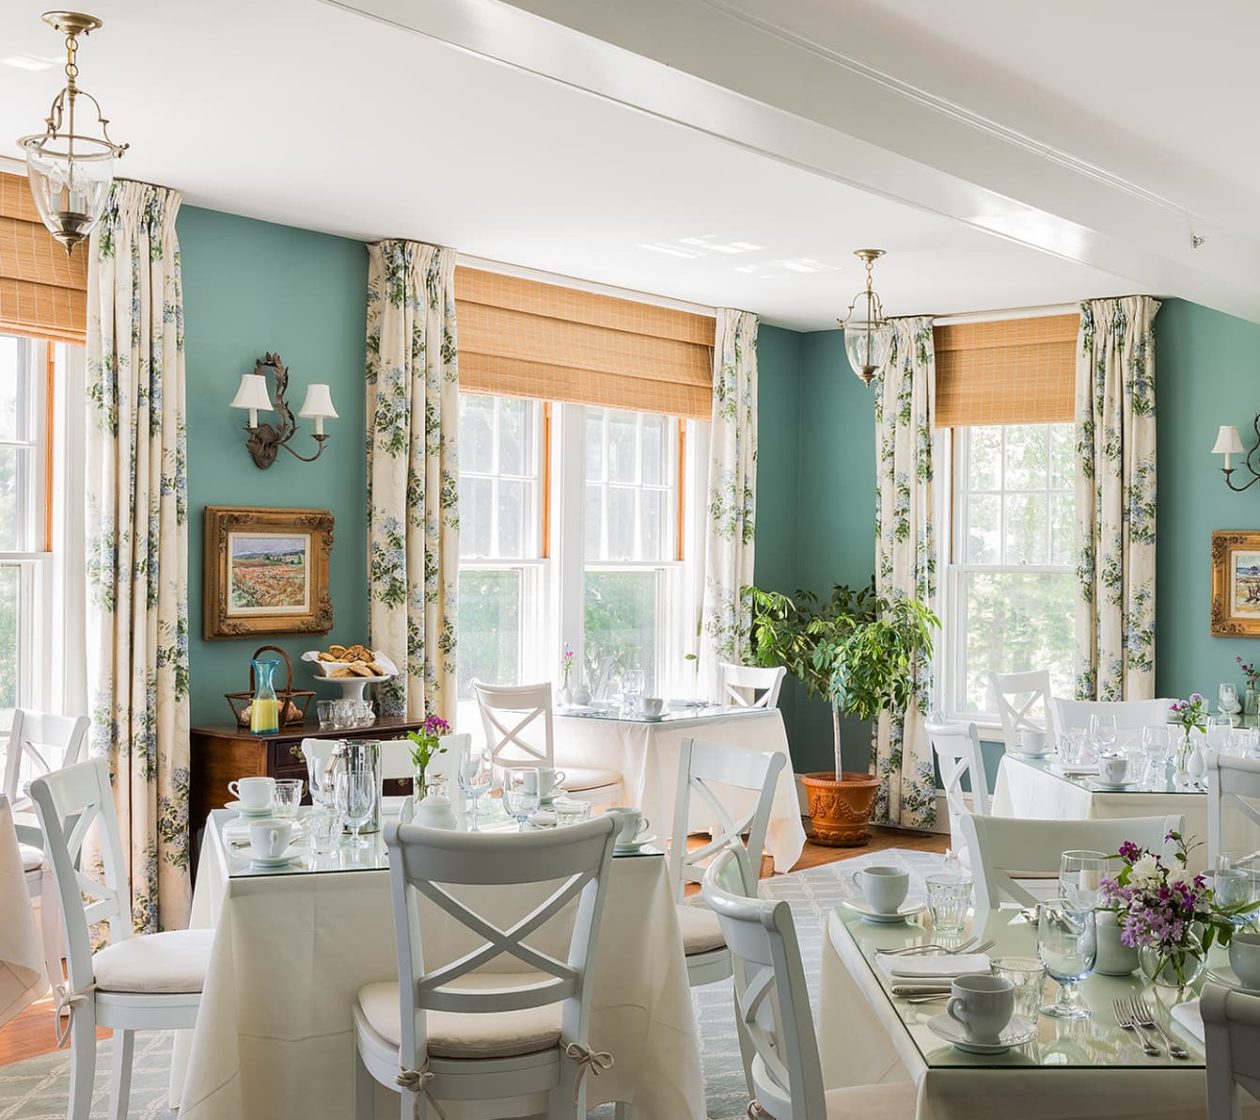 Tables set for gourmet breakfast in the dining room